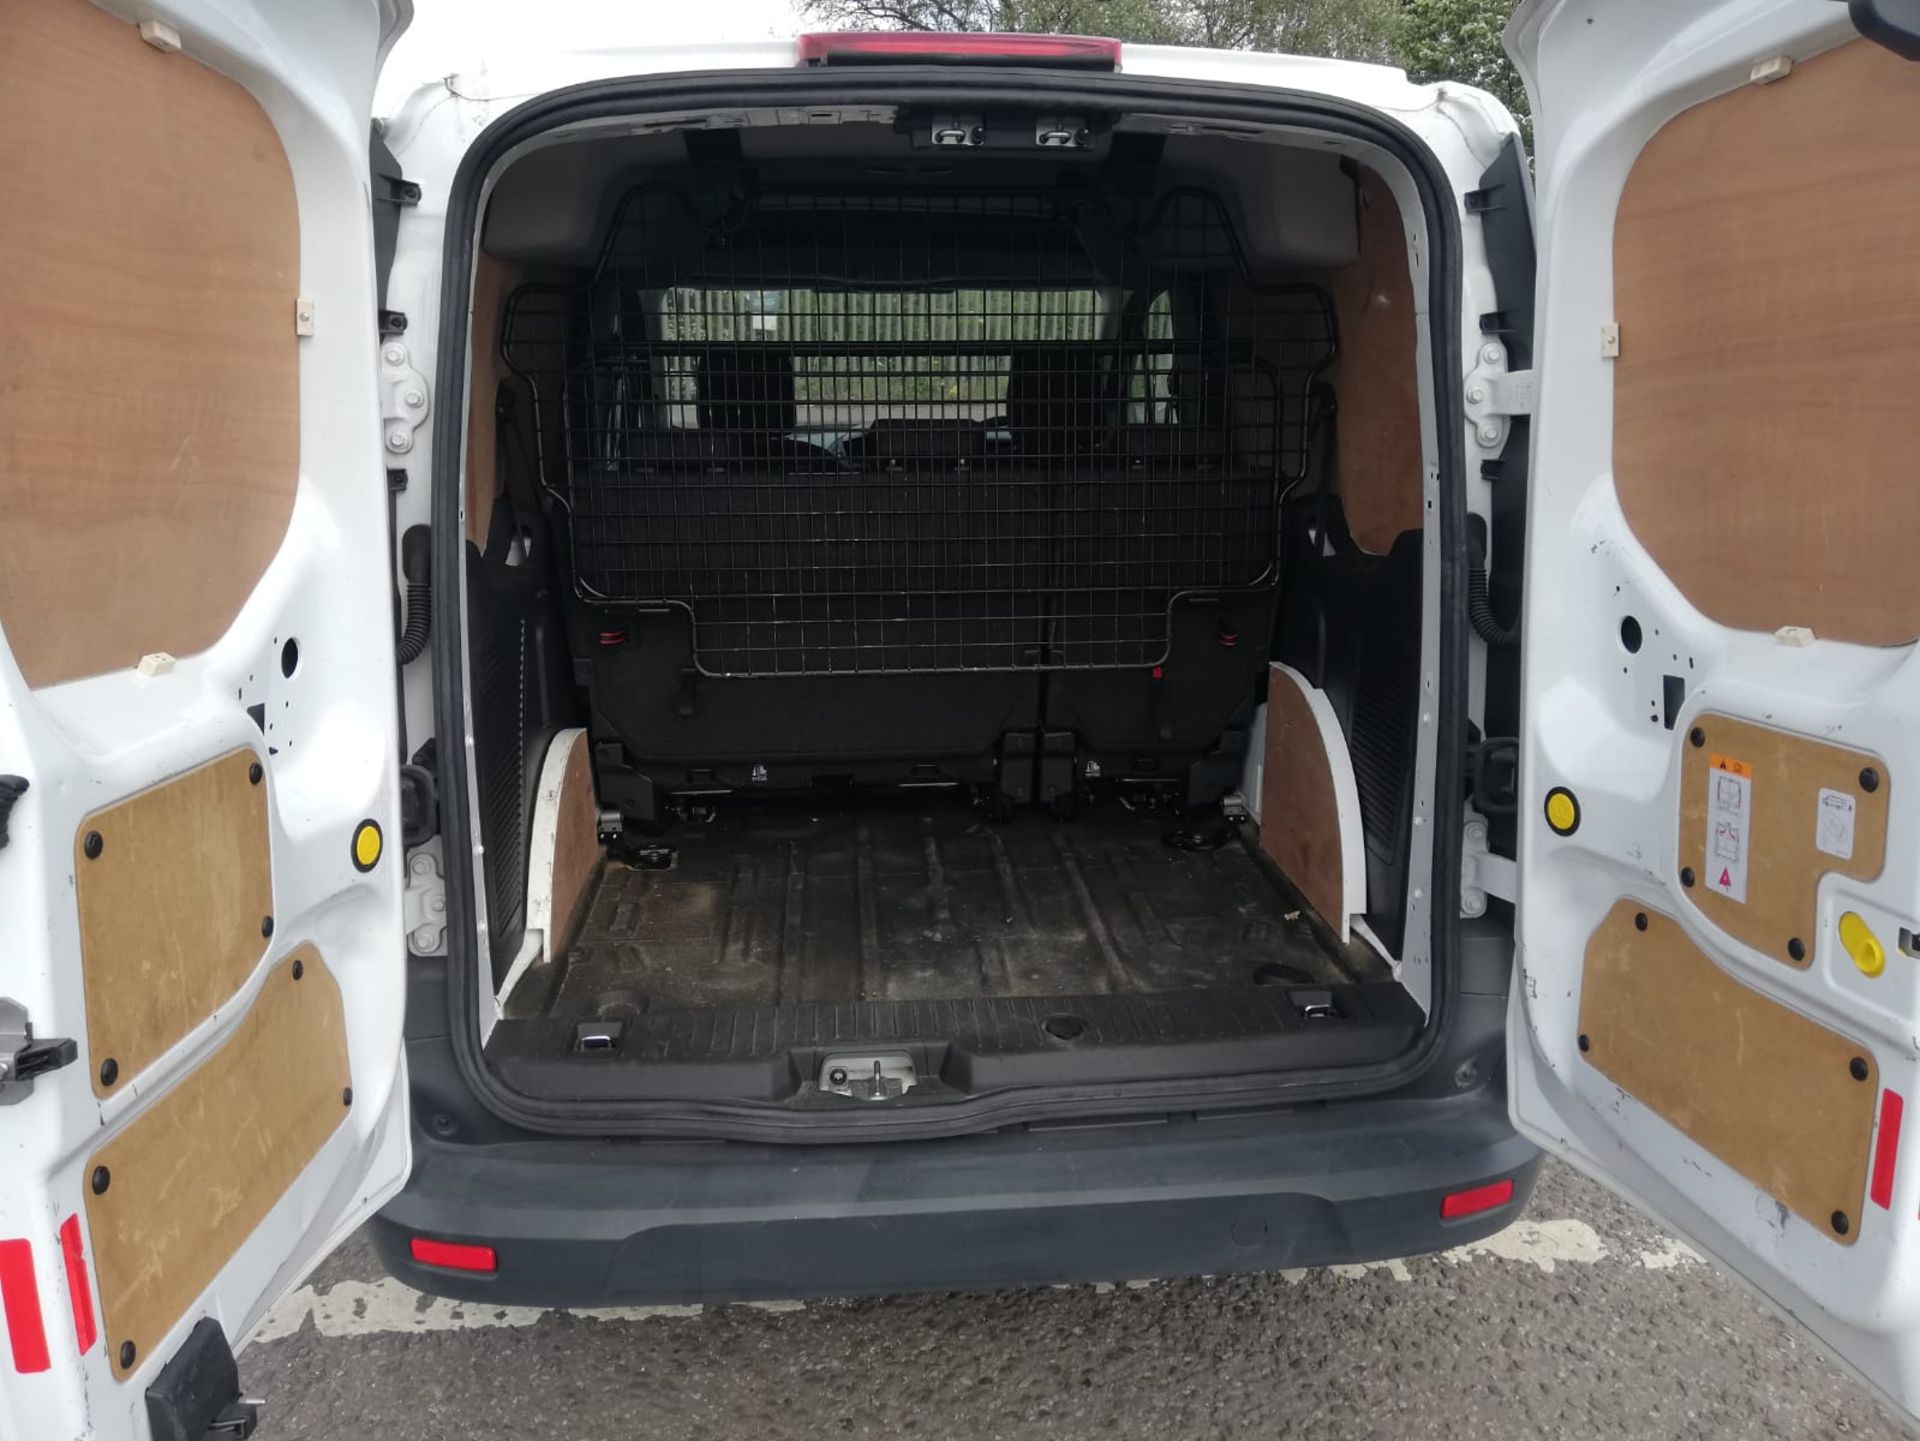 2018/67 FORD TRANSIT CONNECT 220 CREW CAB, 86K MILES WITH PART HISTORY *PLUS VAT* - Image 8 of 10